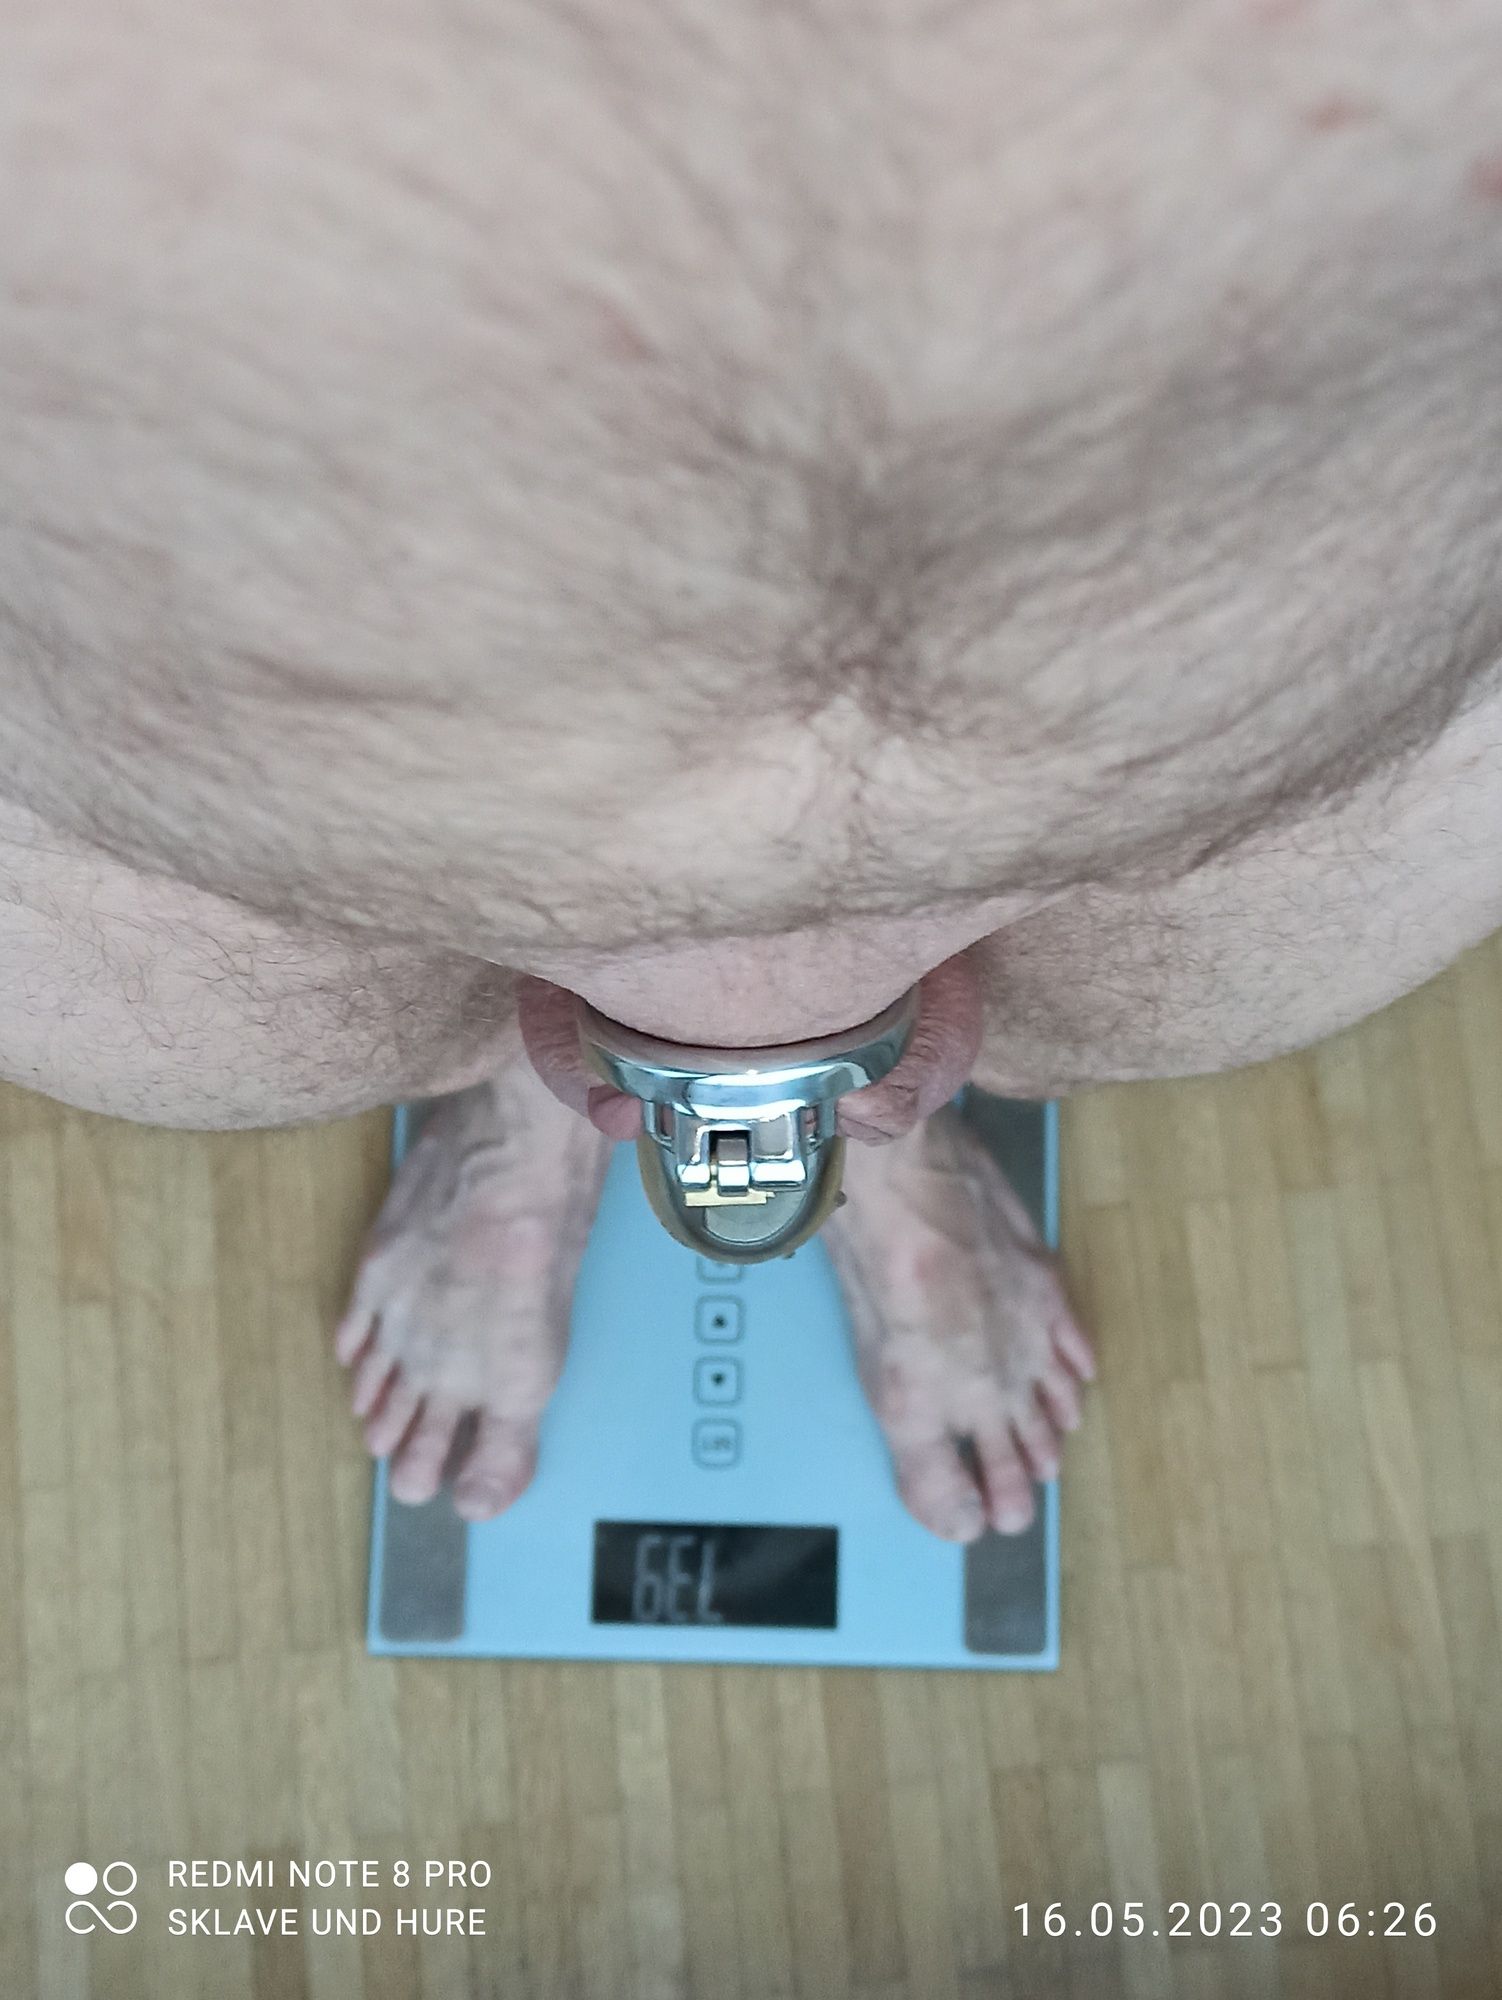 After the weighing 